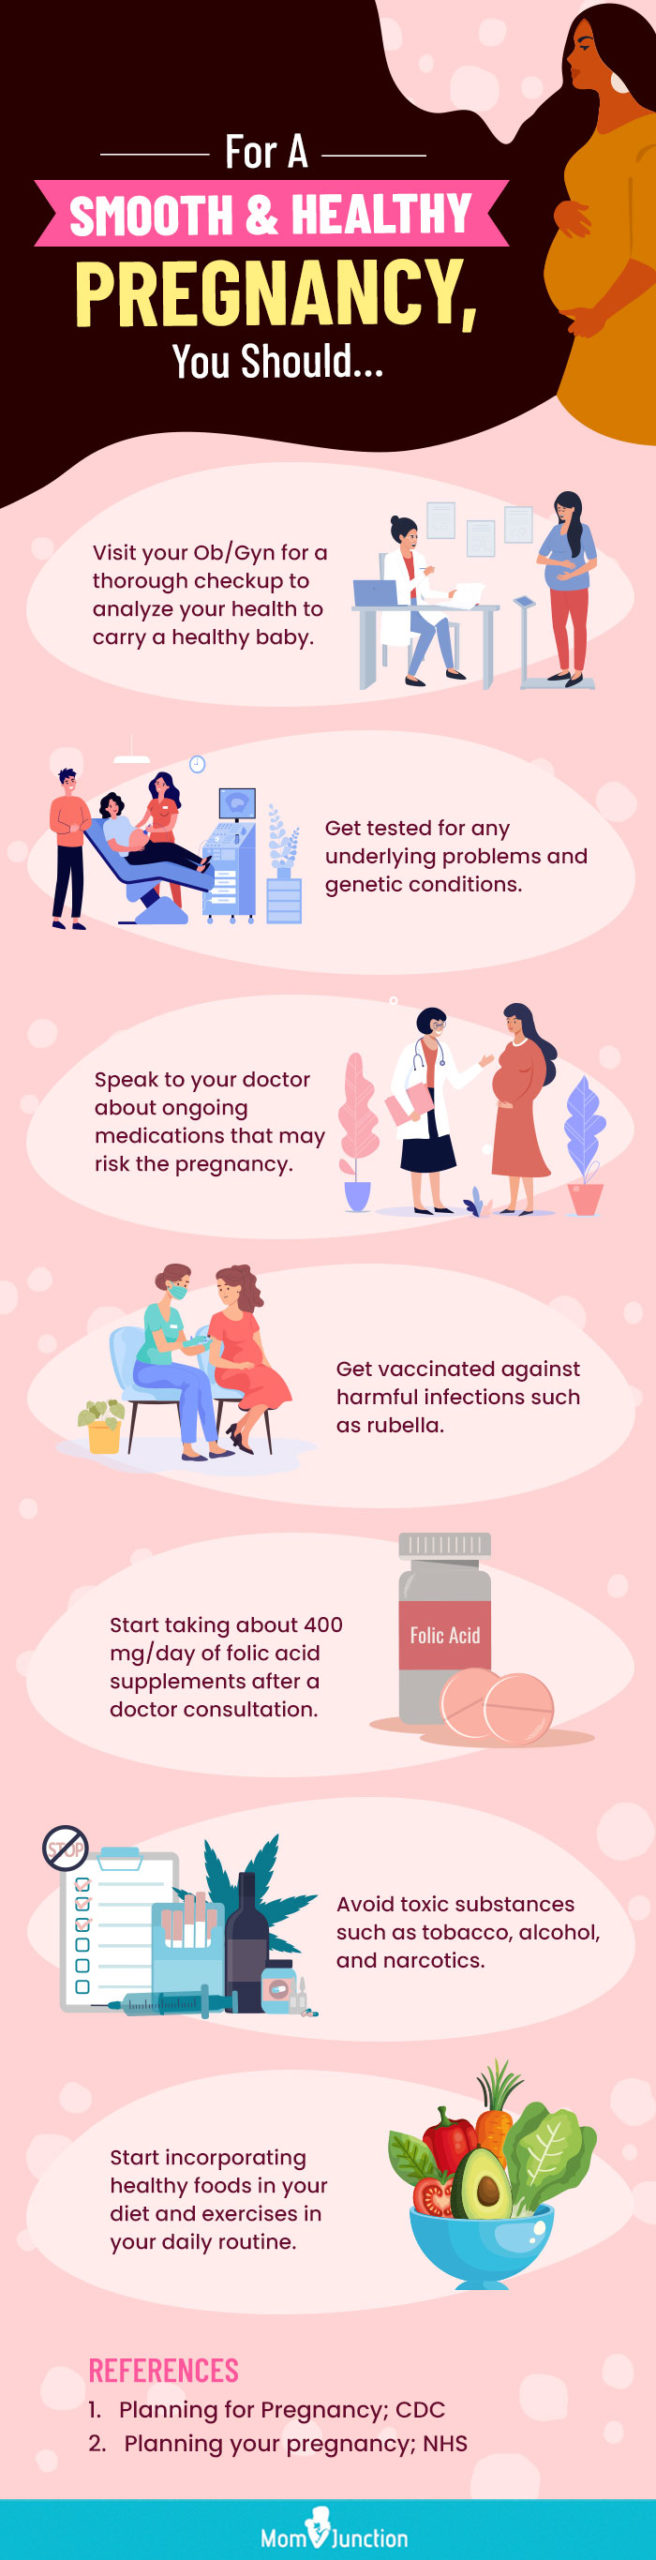 things you must do while planning your pregnancy [infographic]